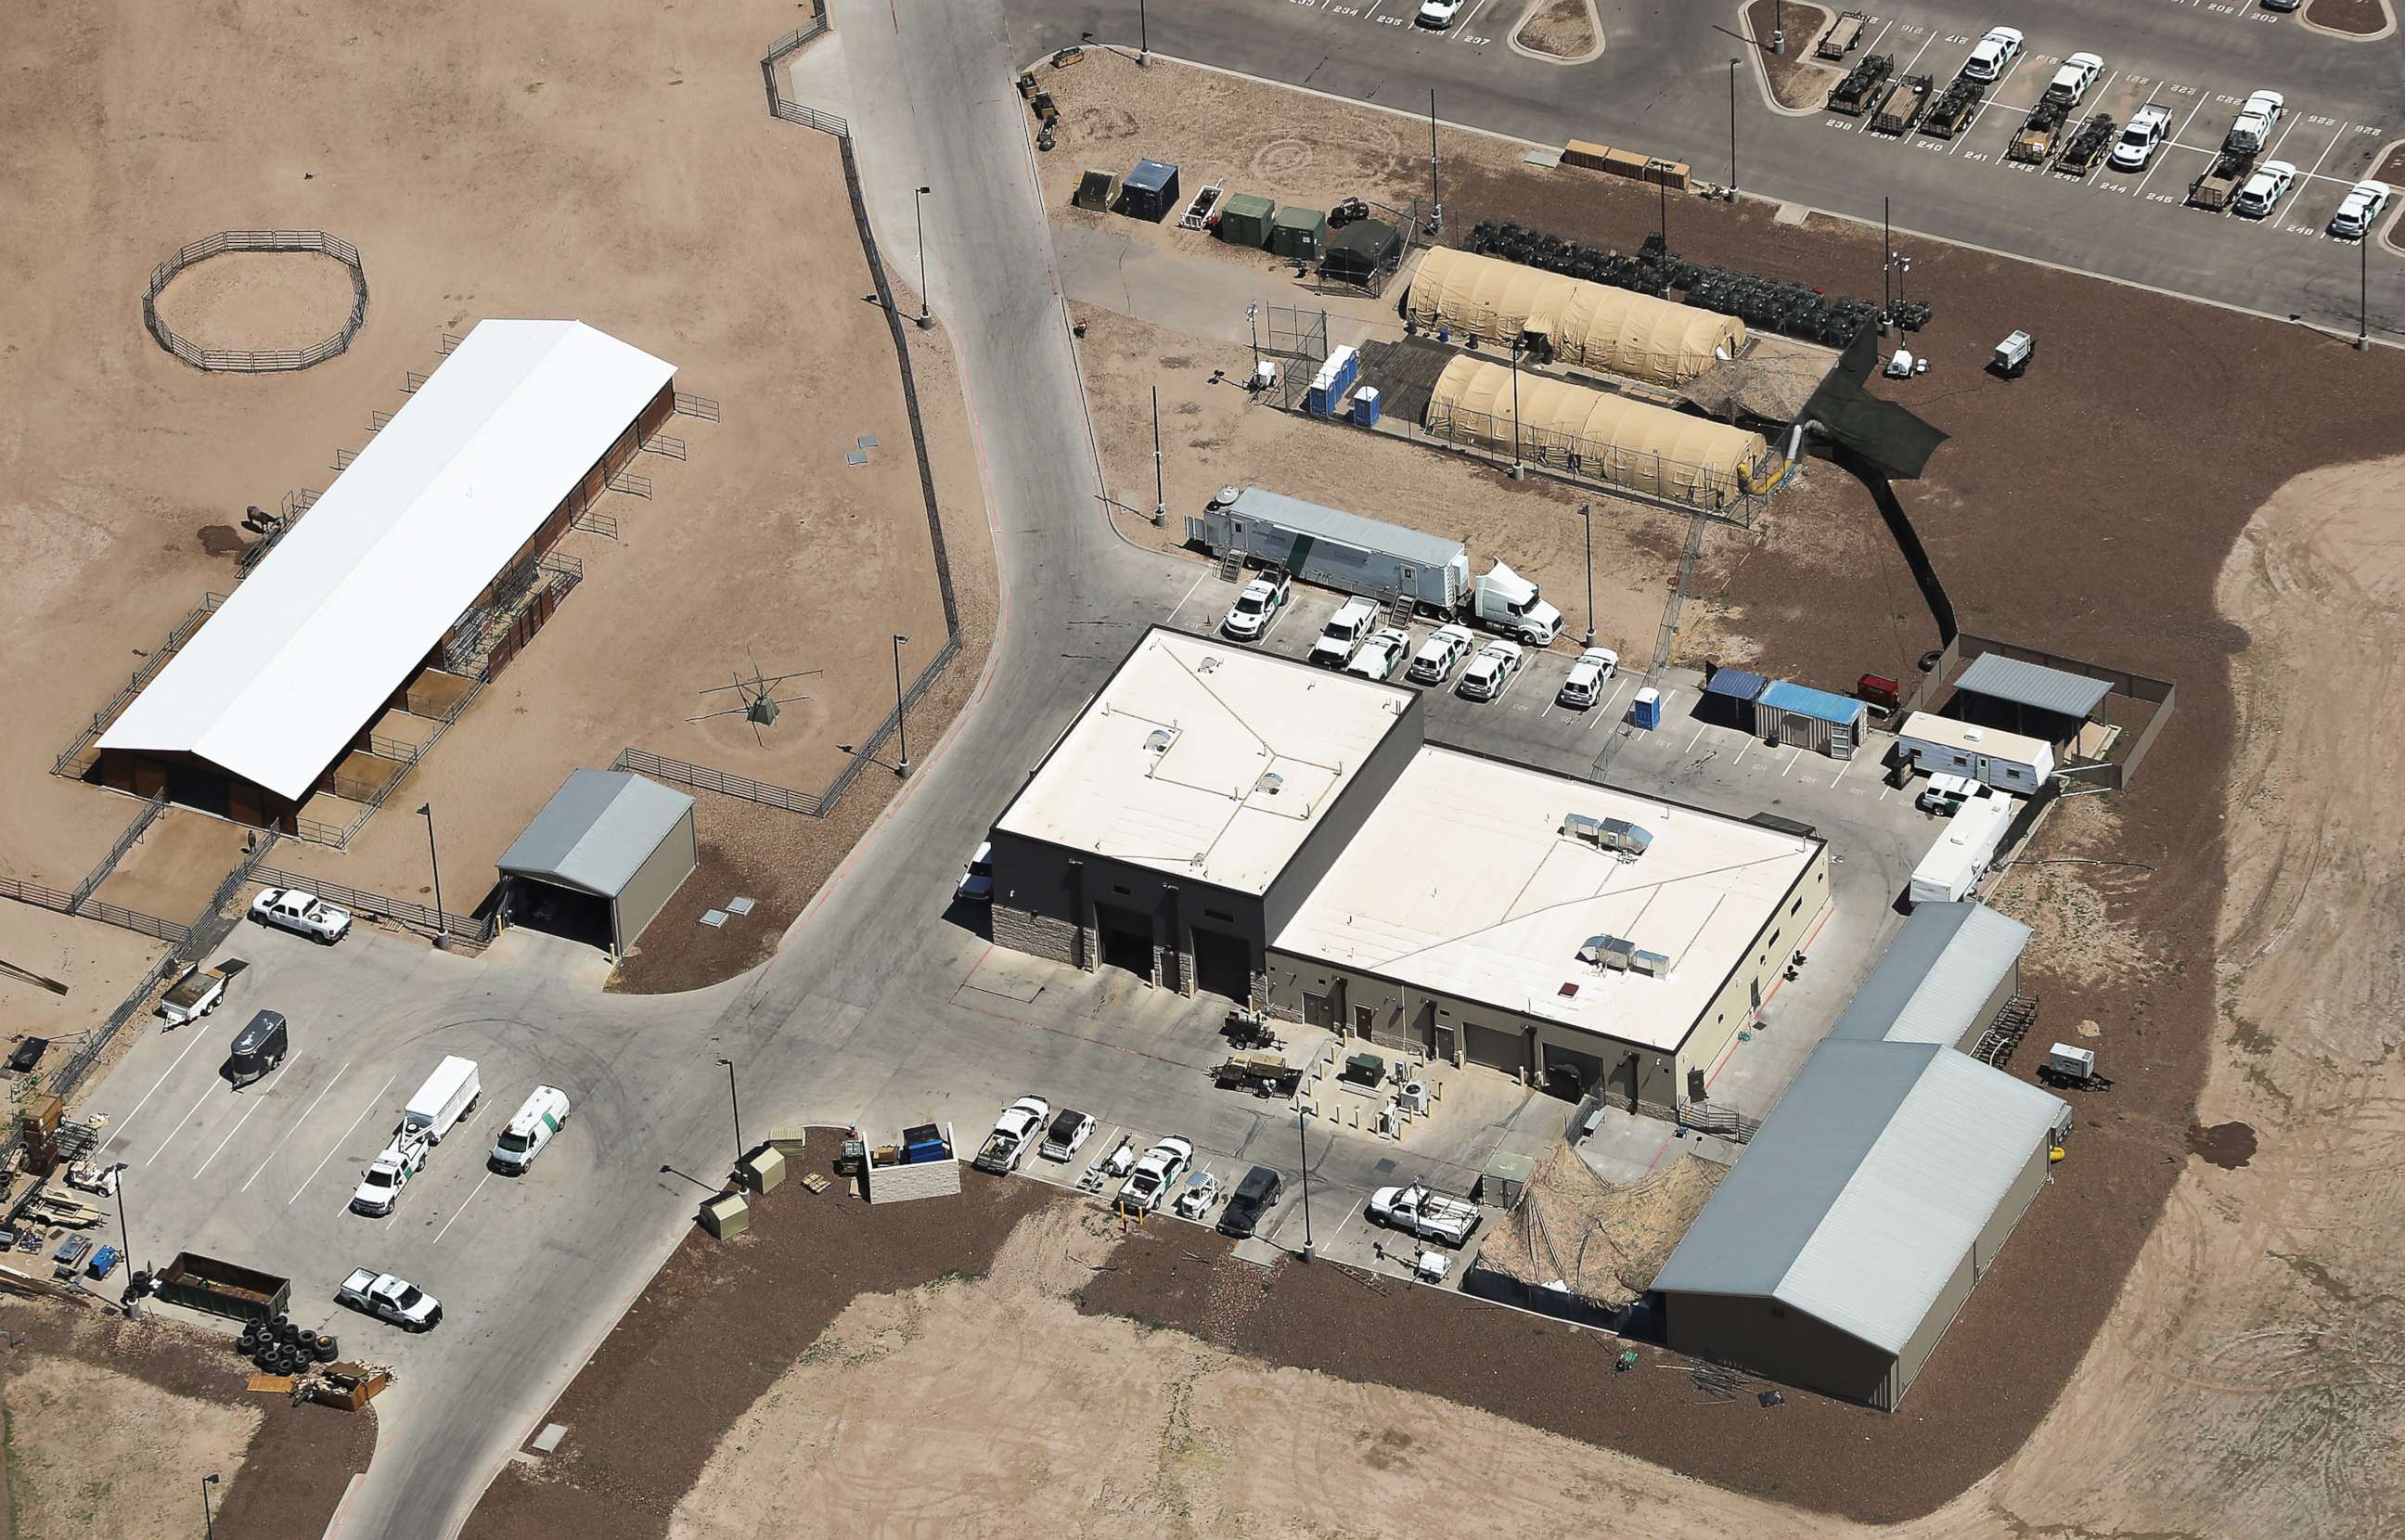 PHOTO: An aerial view of U.S. Border Patrol station facilities on June 28, 2019 in Clint, Texas.